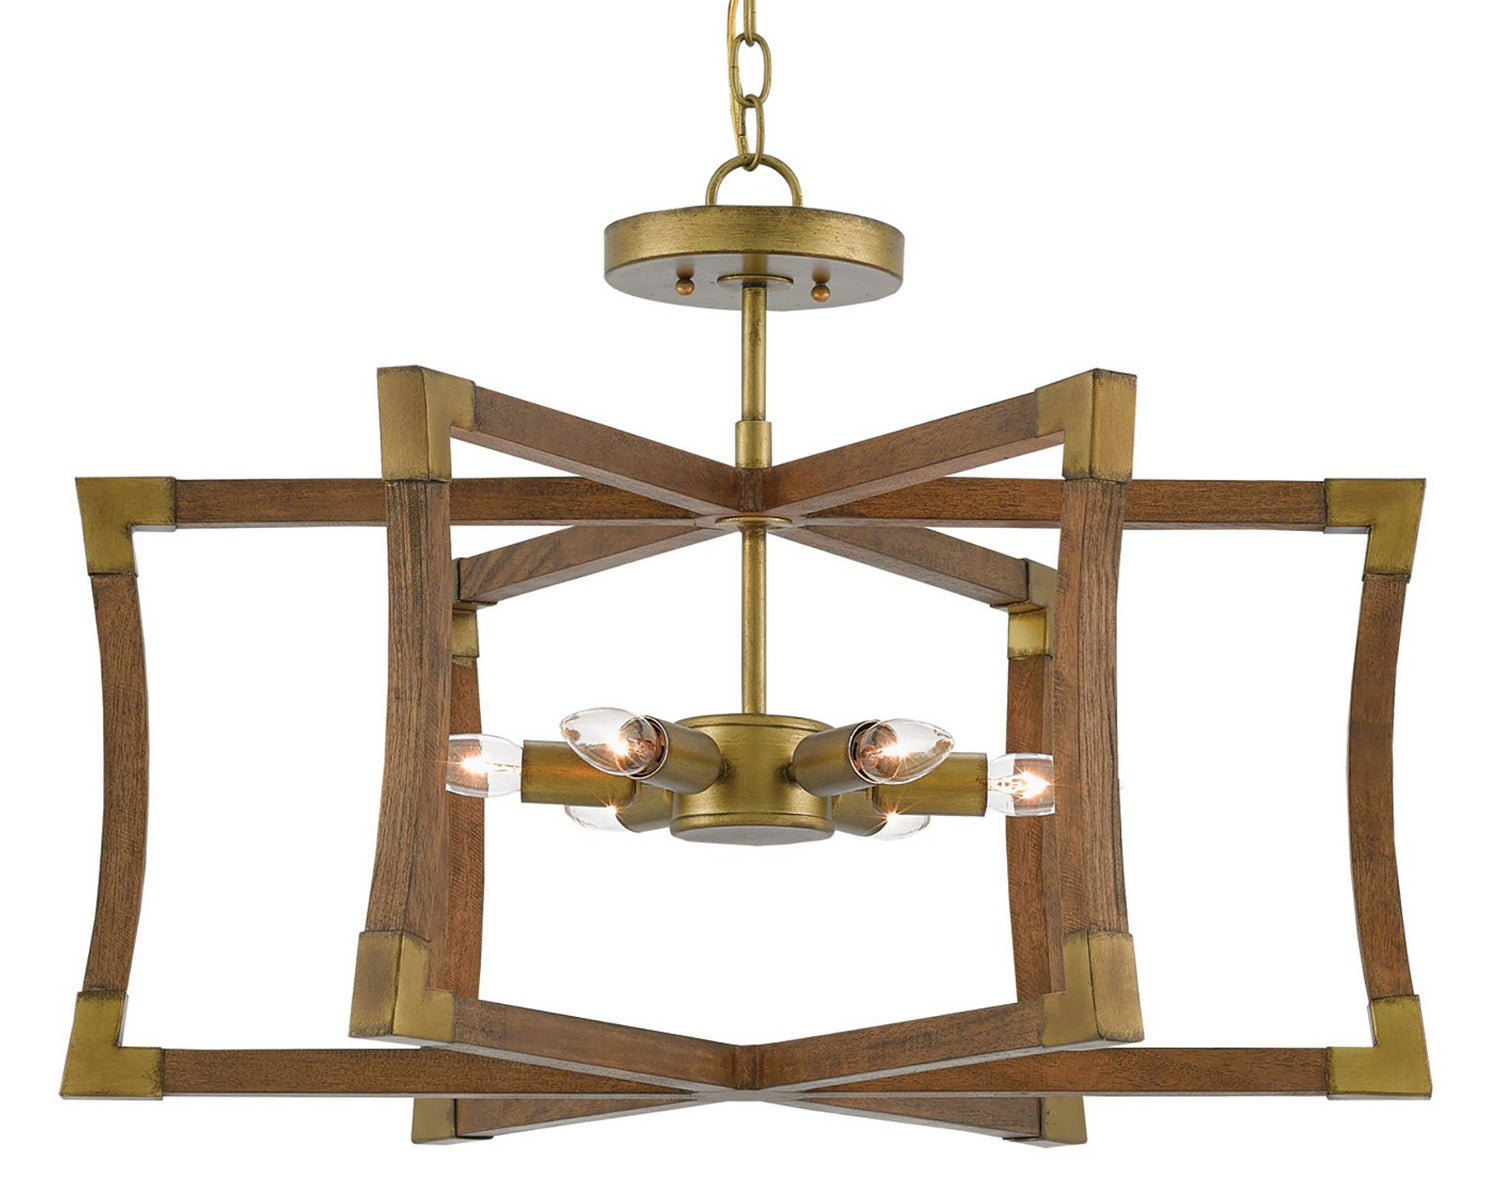 Six Light Lantern from the Bastian collection in Chestnut/Brass finish